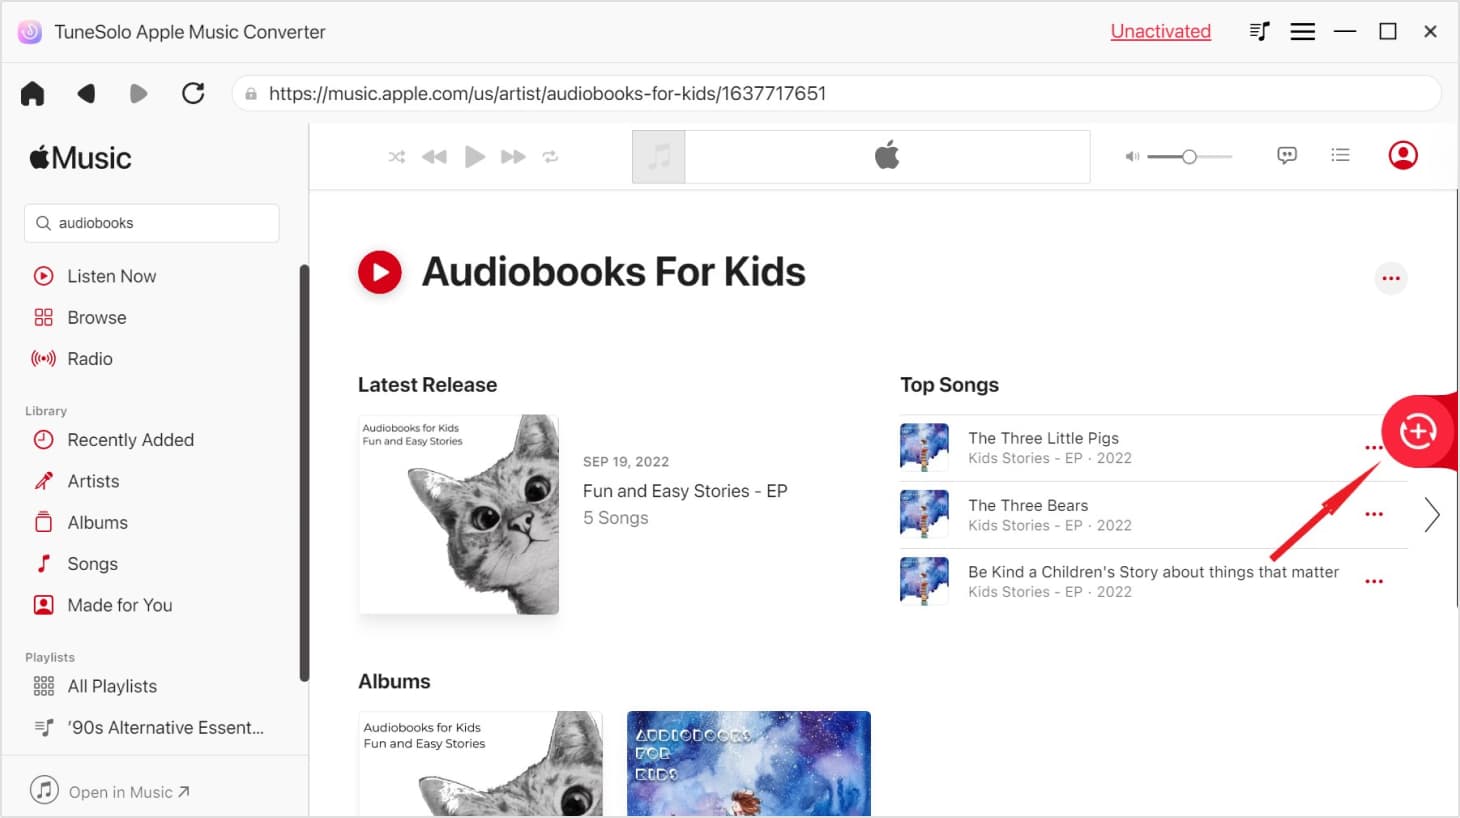 Add Audiobooks to the Converter